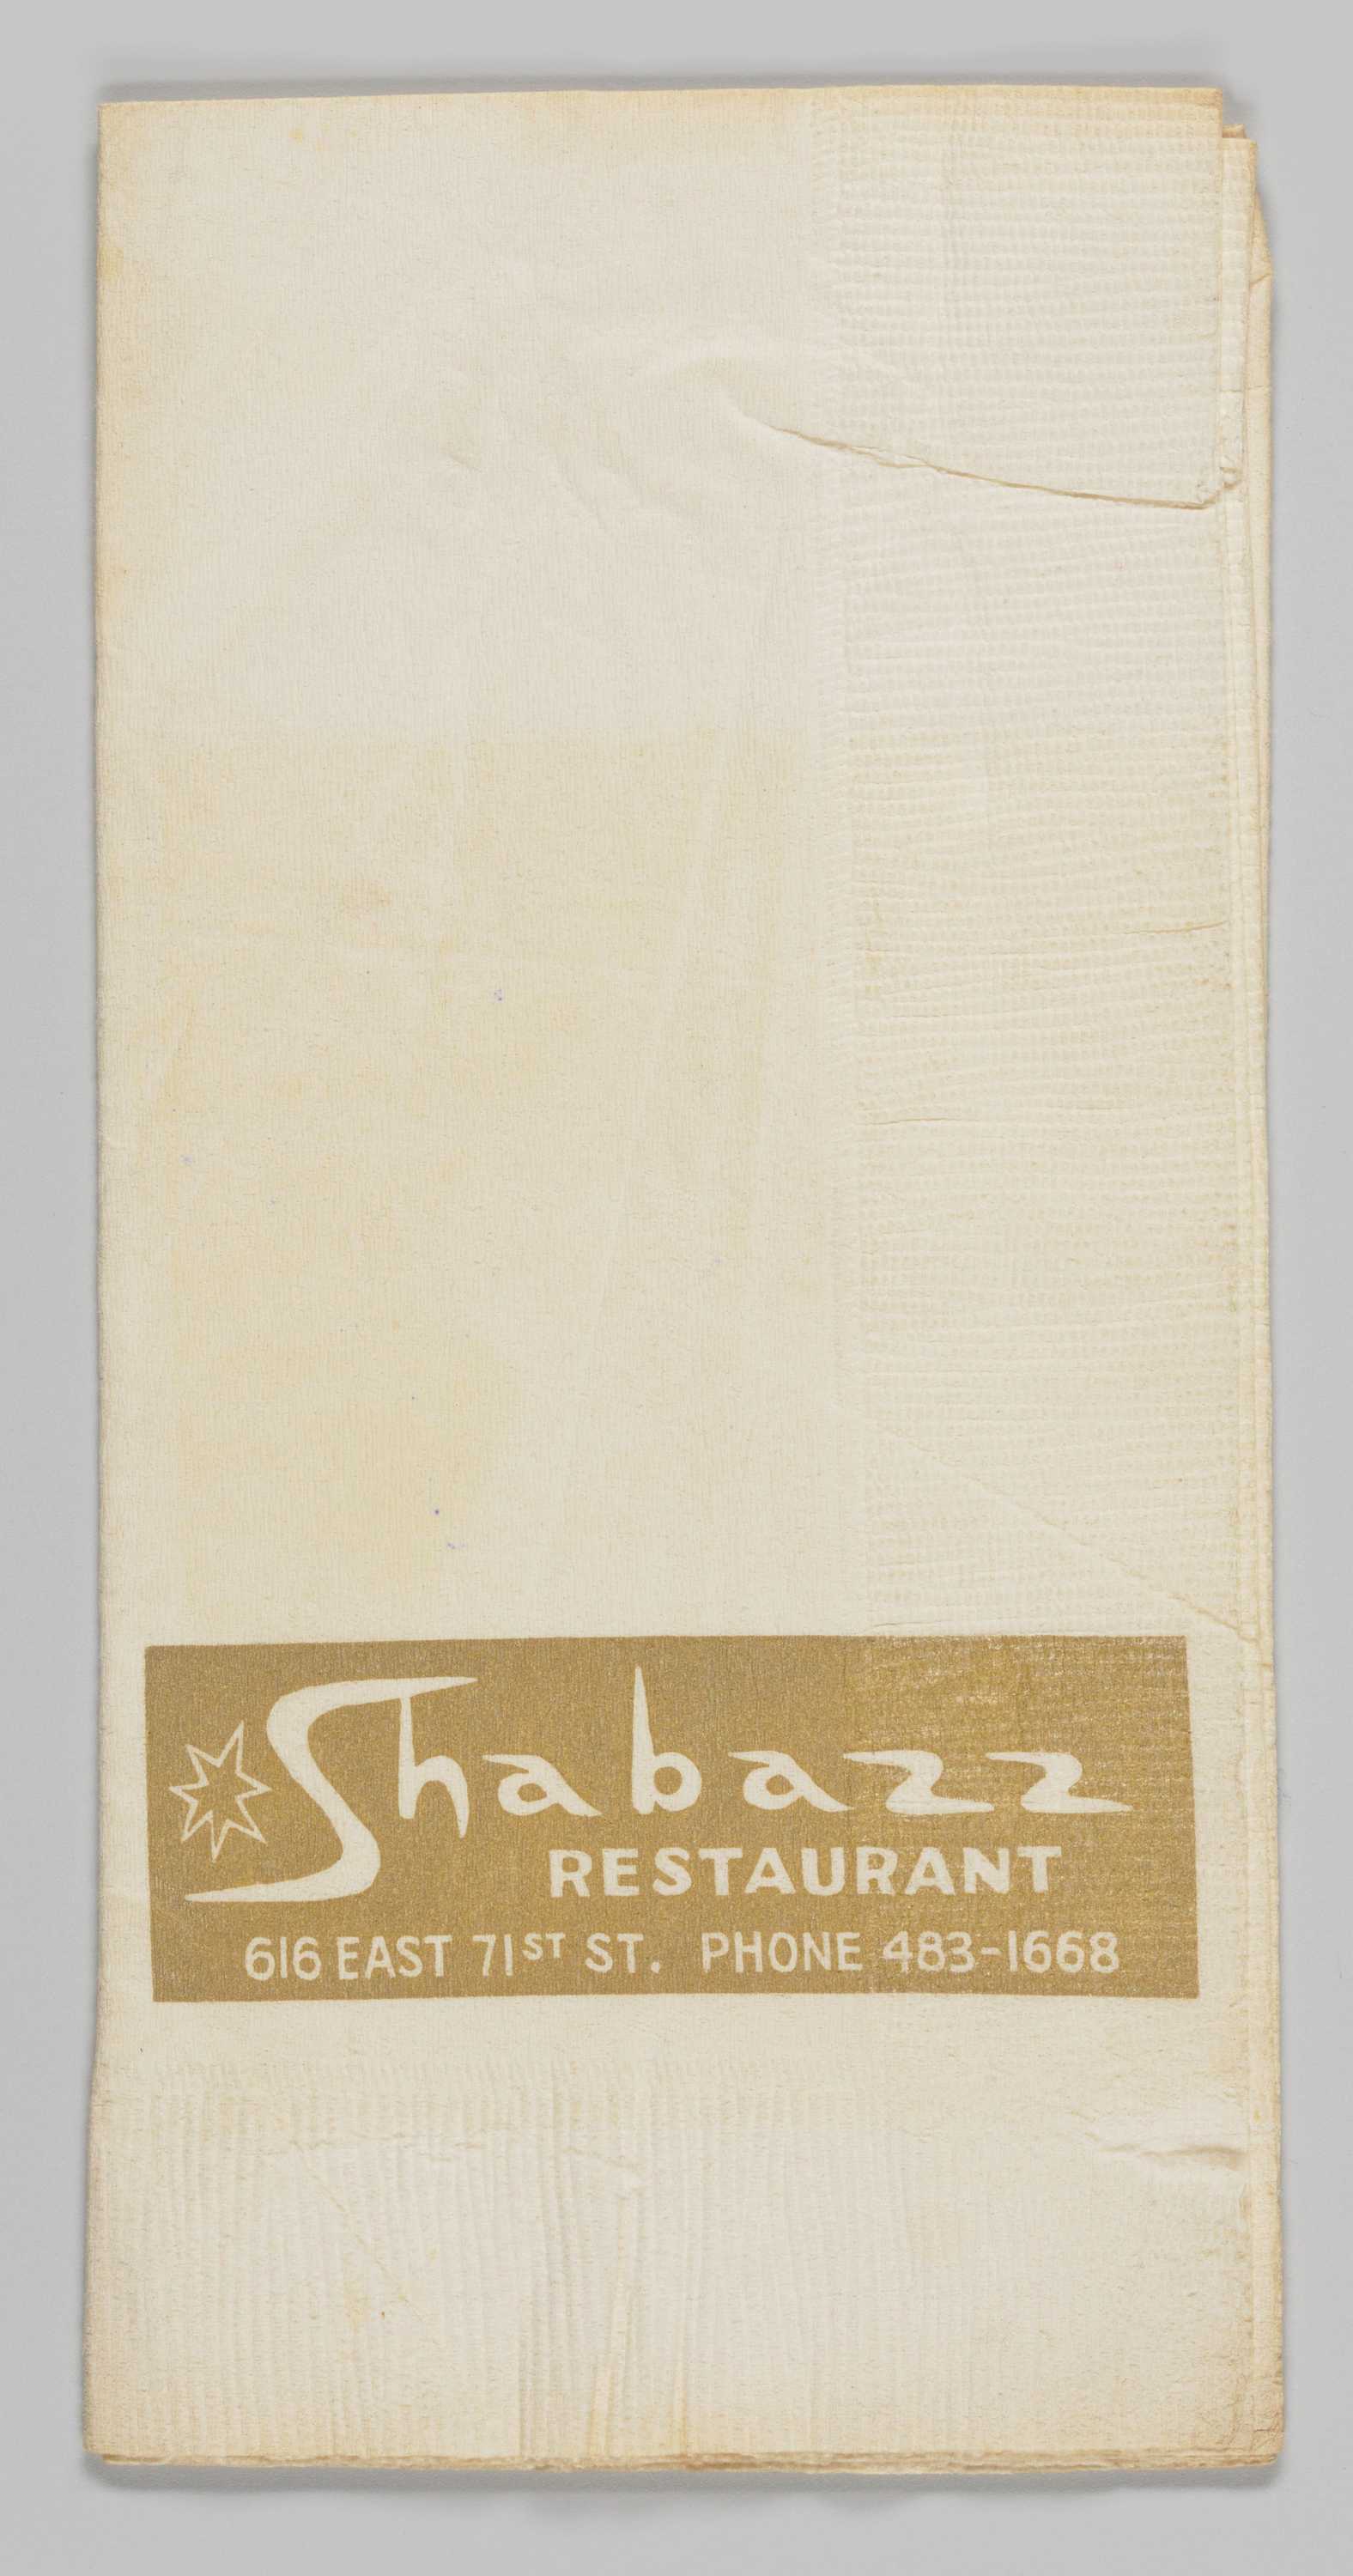 This rectangular Shabazz Restaurant paper napkin is off white with a light brown horizontal rectangular field on the lower third portion of the front